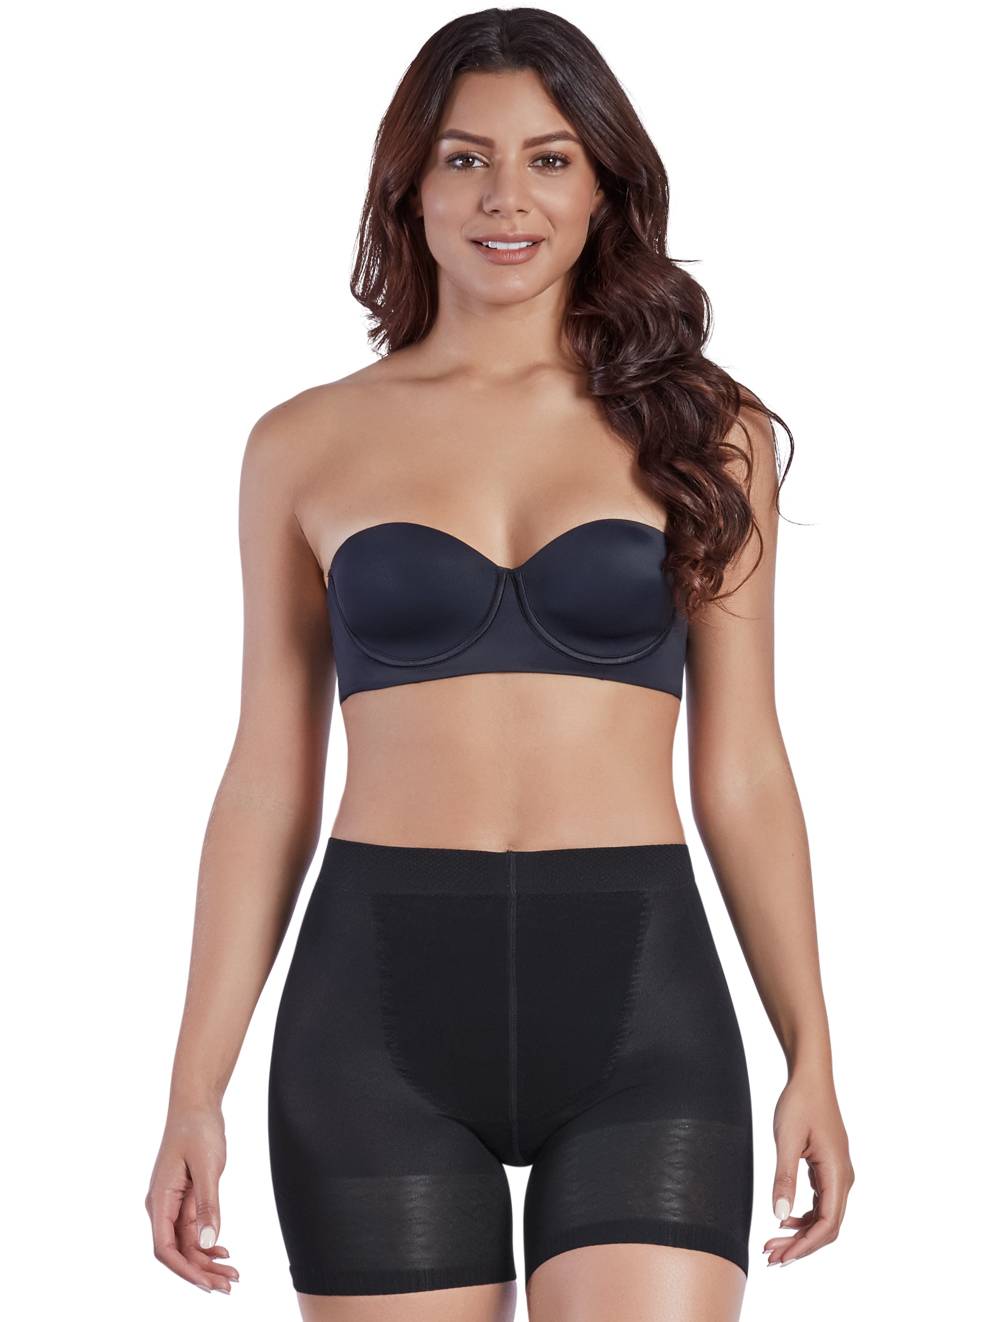 Final Sale Clearance Shaperlove Special Butt Lift Thermal Thigh Slimmer